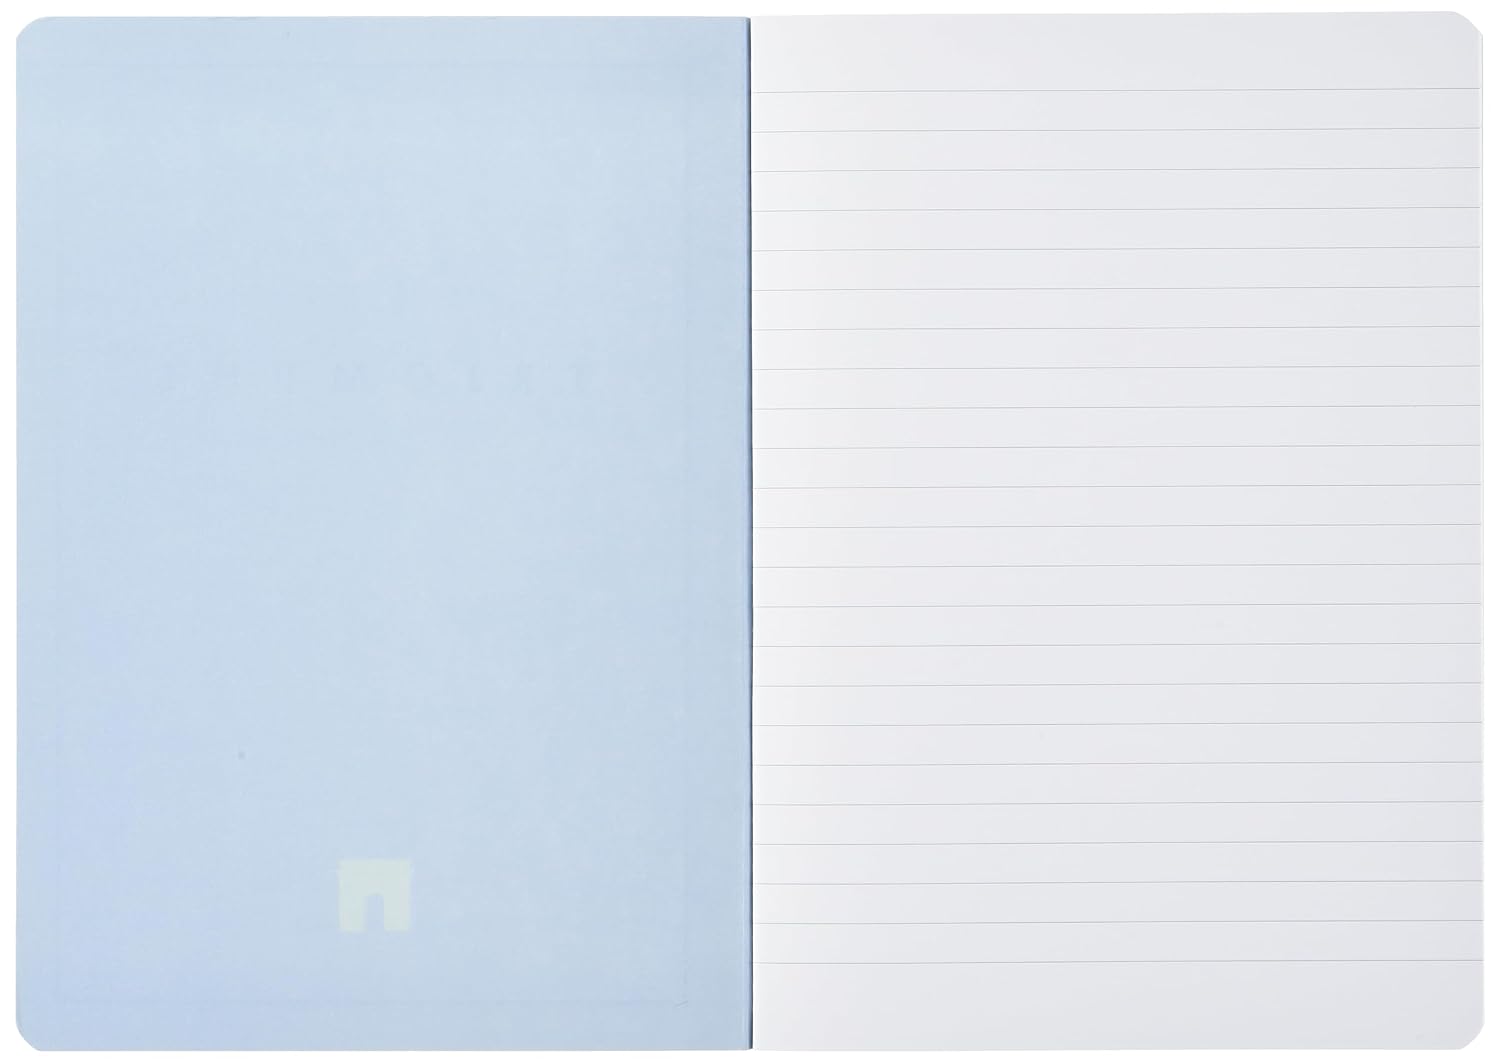 CLAIREFONTAINE Triomphe Gold Notebook A5 48s 90g White Lined